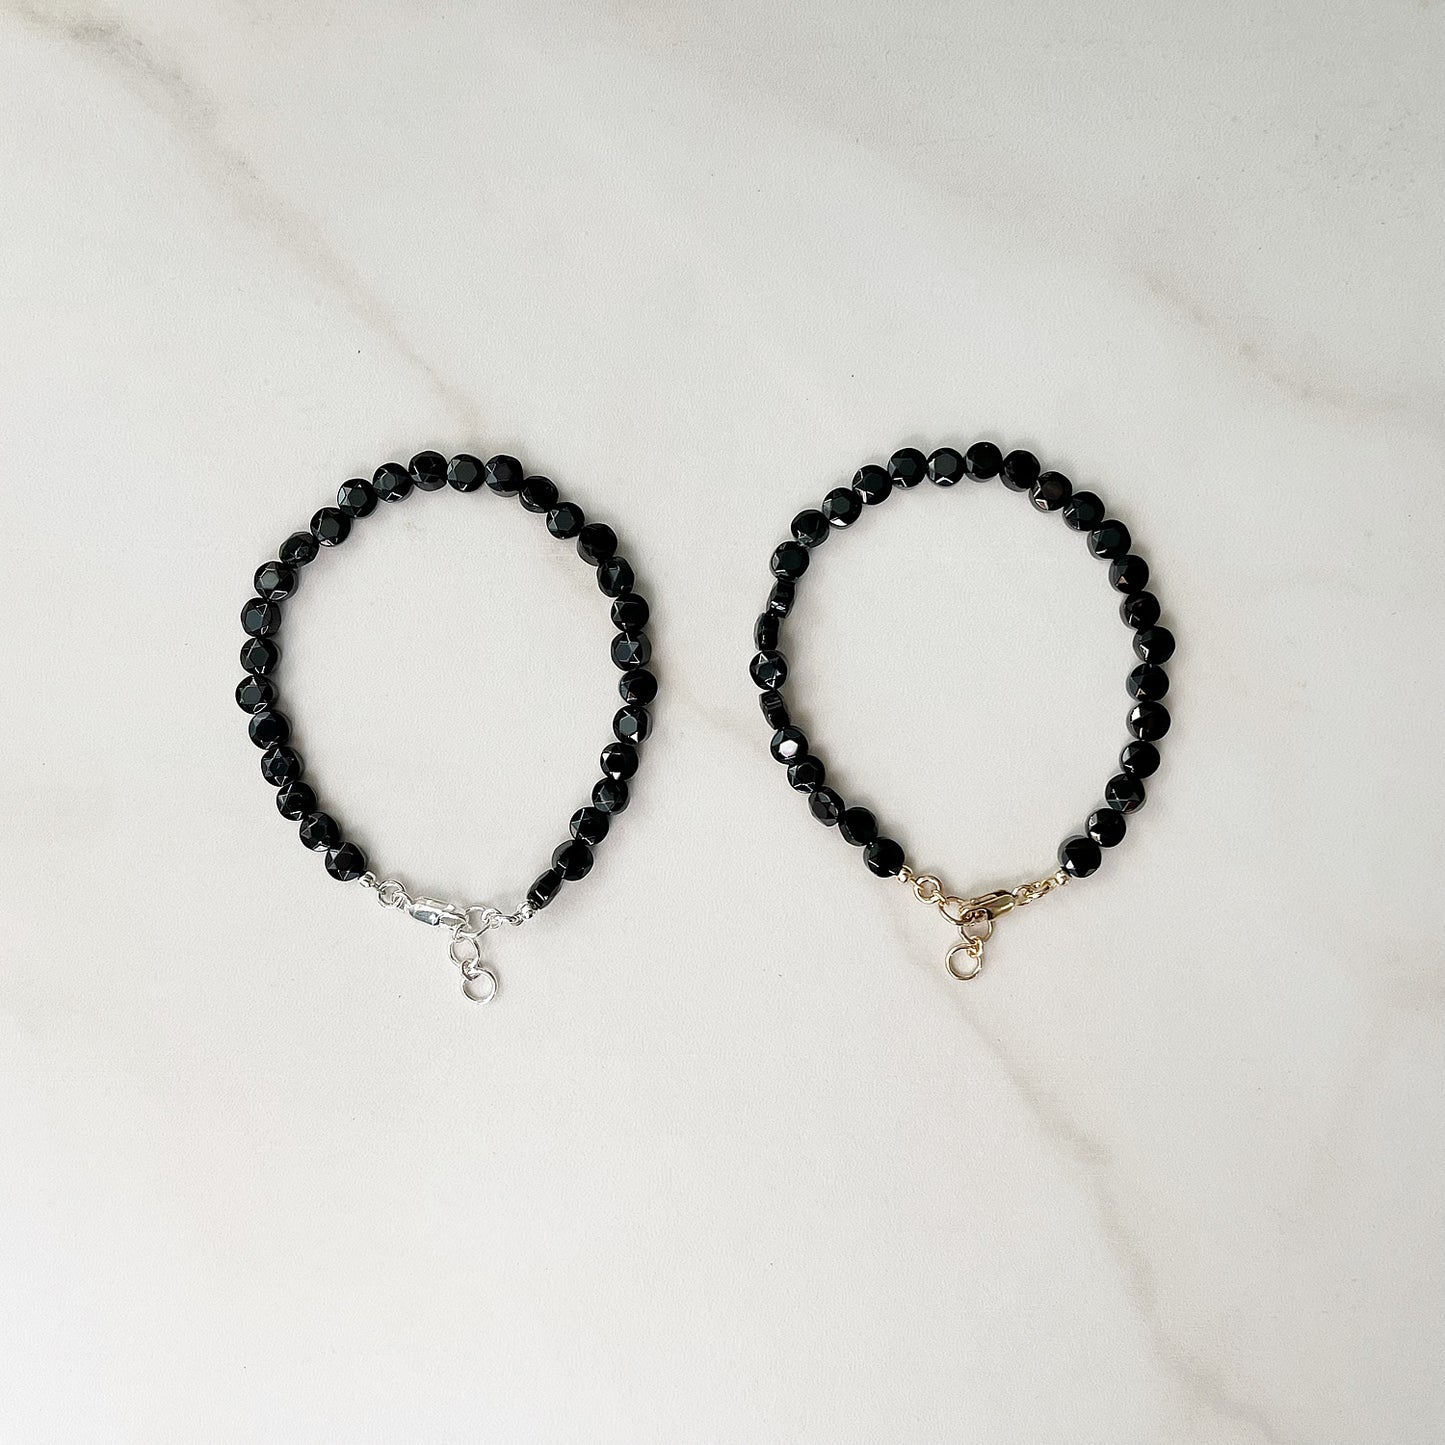 two single strand onyx bracelets with sterling silver or 14k gold filled hardware